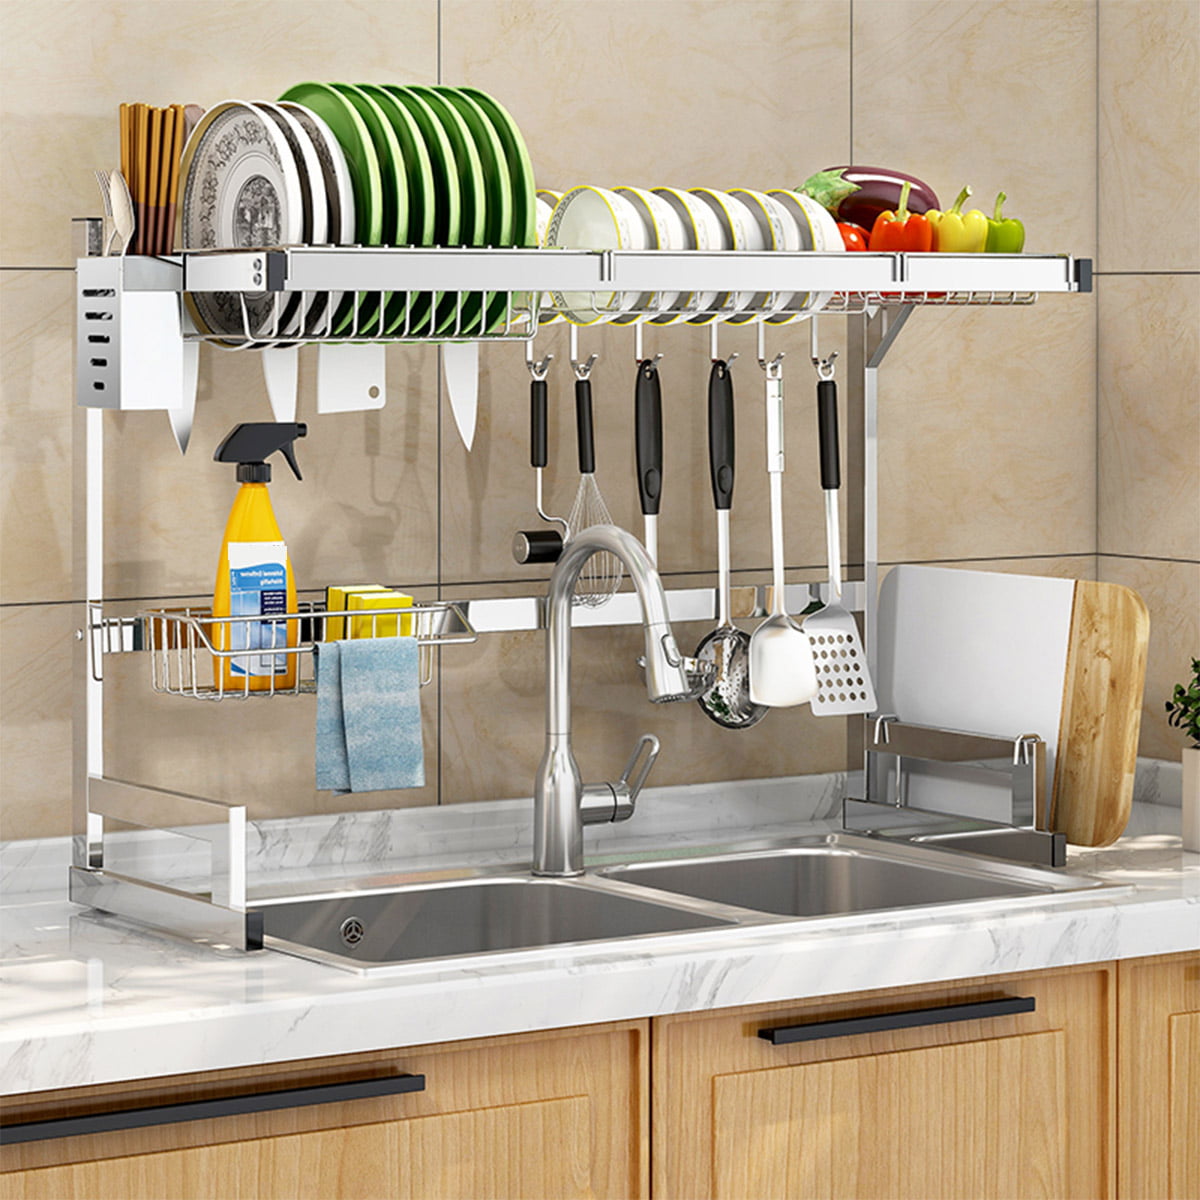 Over the Sink Dish Rack 2 Tier Dish Drying Rack 33x12x19 inches Large Dish  Drainer For Kitchen Sink Stainless Steel